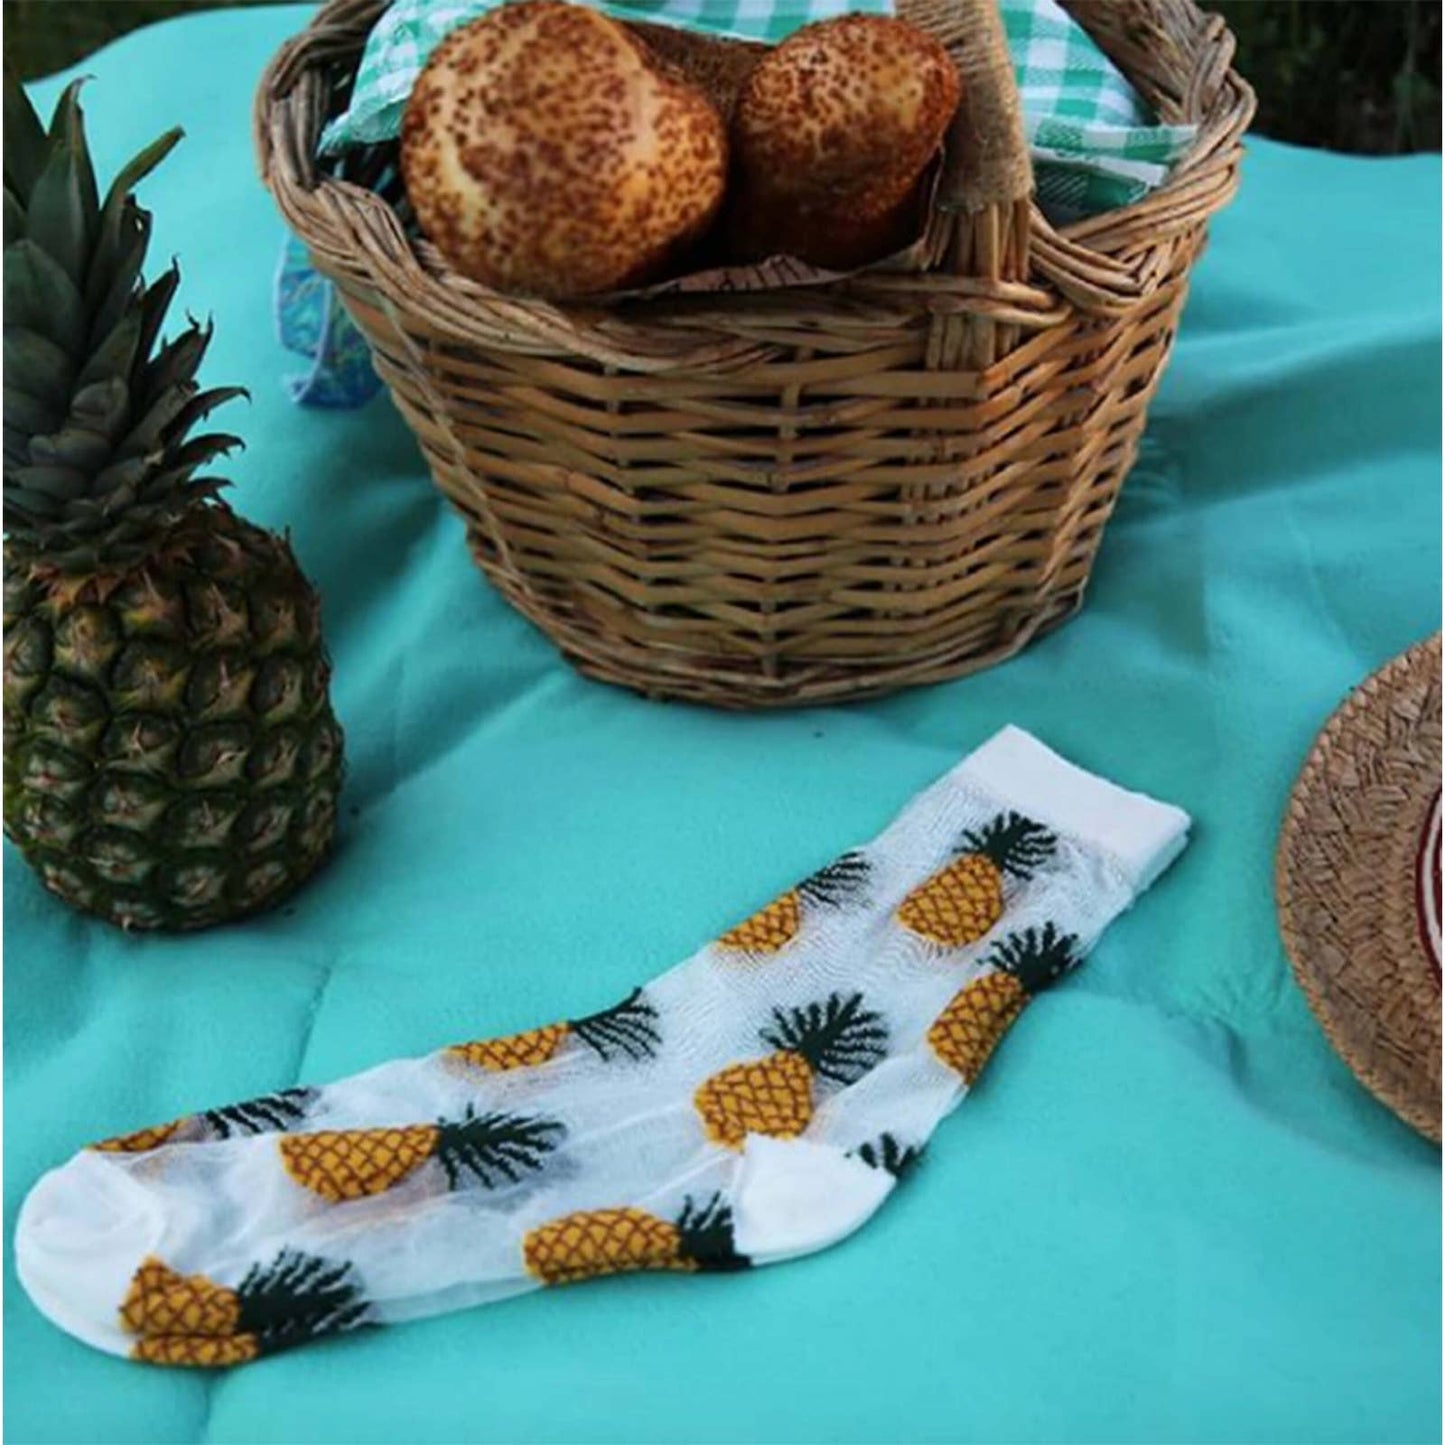 women's white sheer socks with delightful pineapple embroidery, adding a fun and playful element to the design.